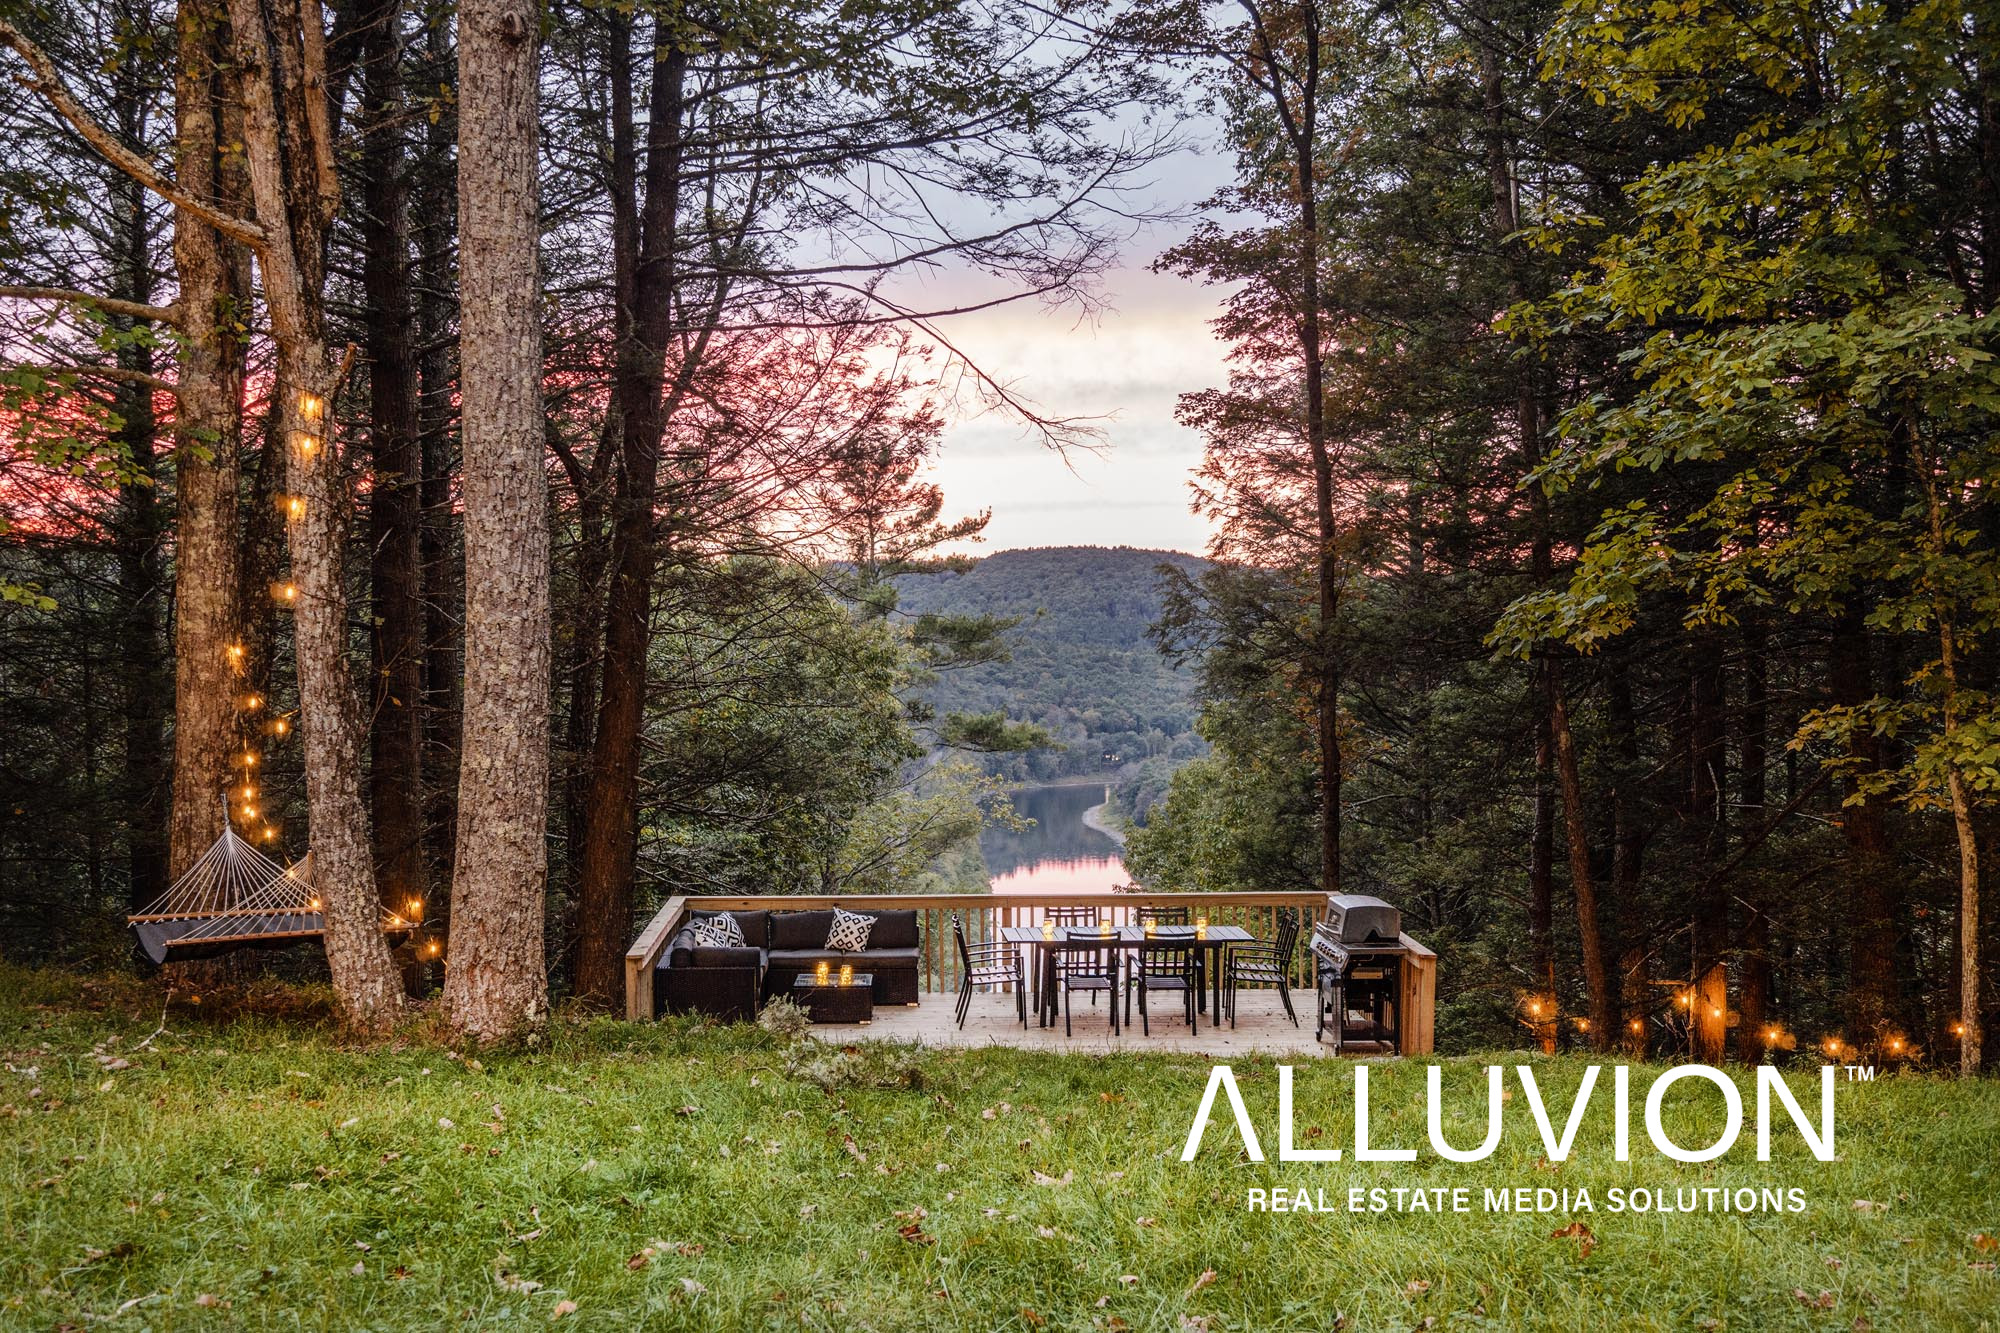 Remote Cabin with Magnificent Catskill Mountains Views – Airbnb Photography by Maxwell Alexander